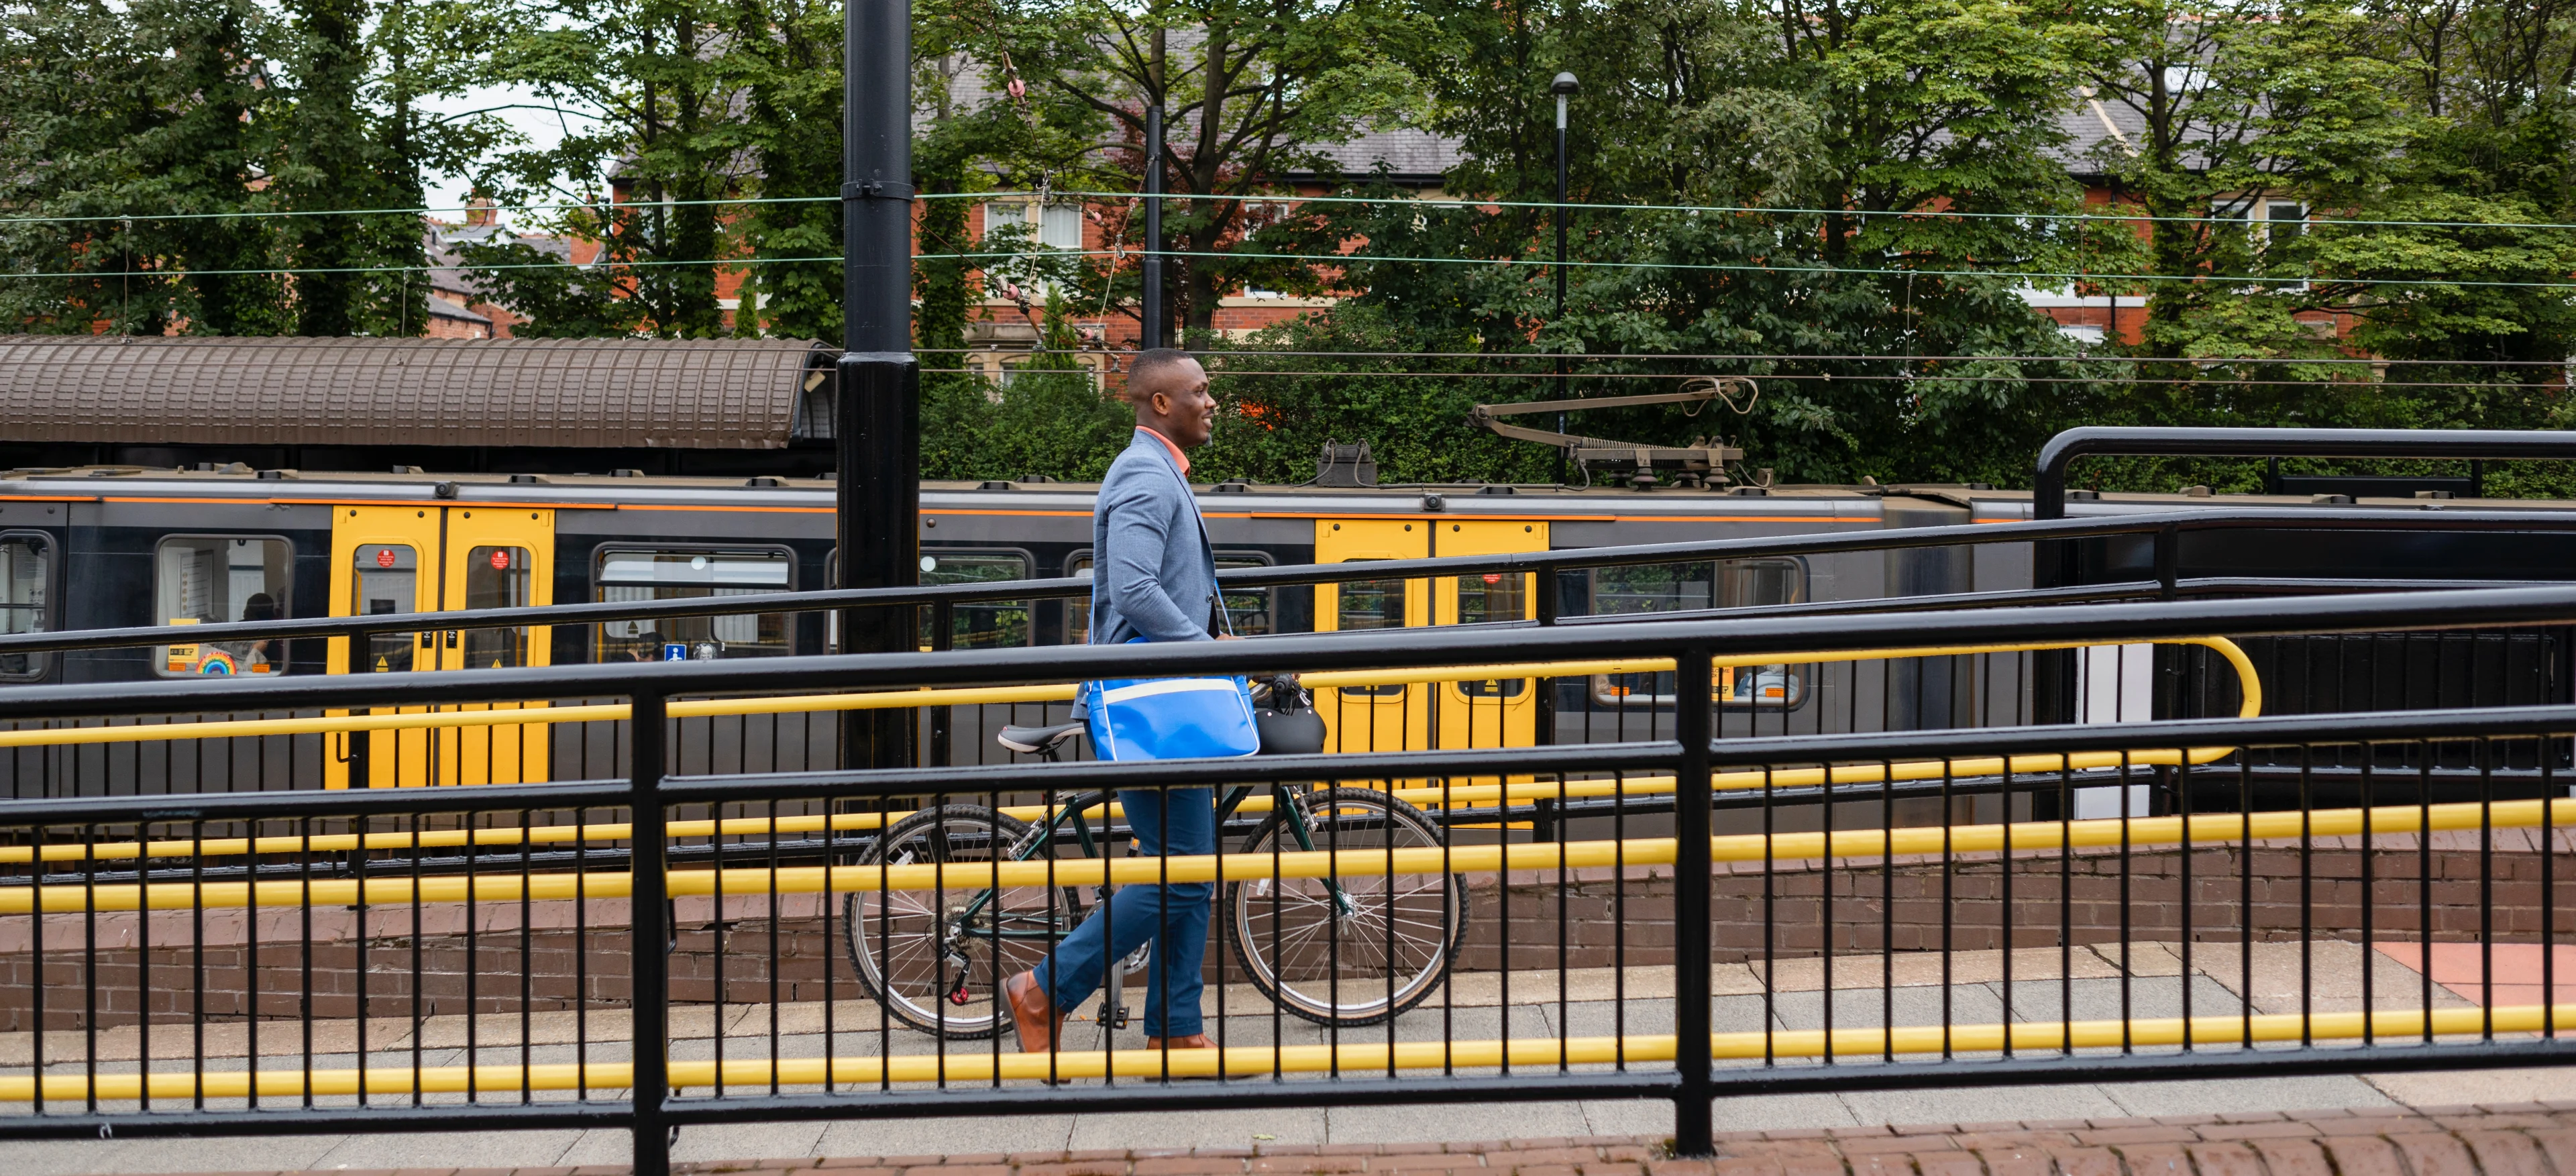 A man pushes a bicycle up a ramp at a train station, with a train at the platform in the background